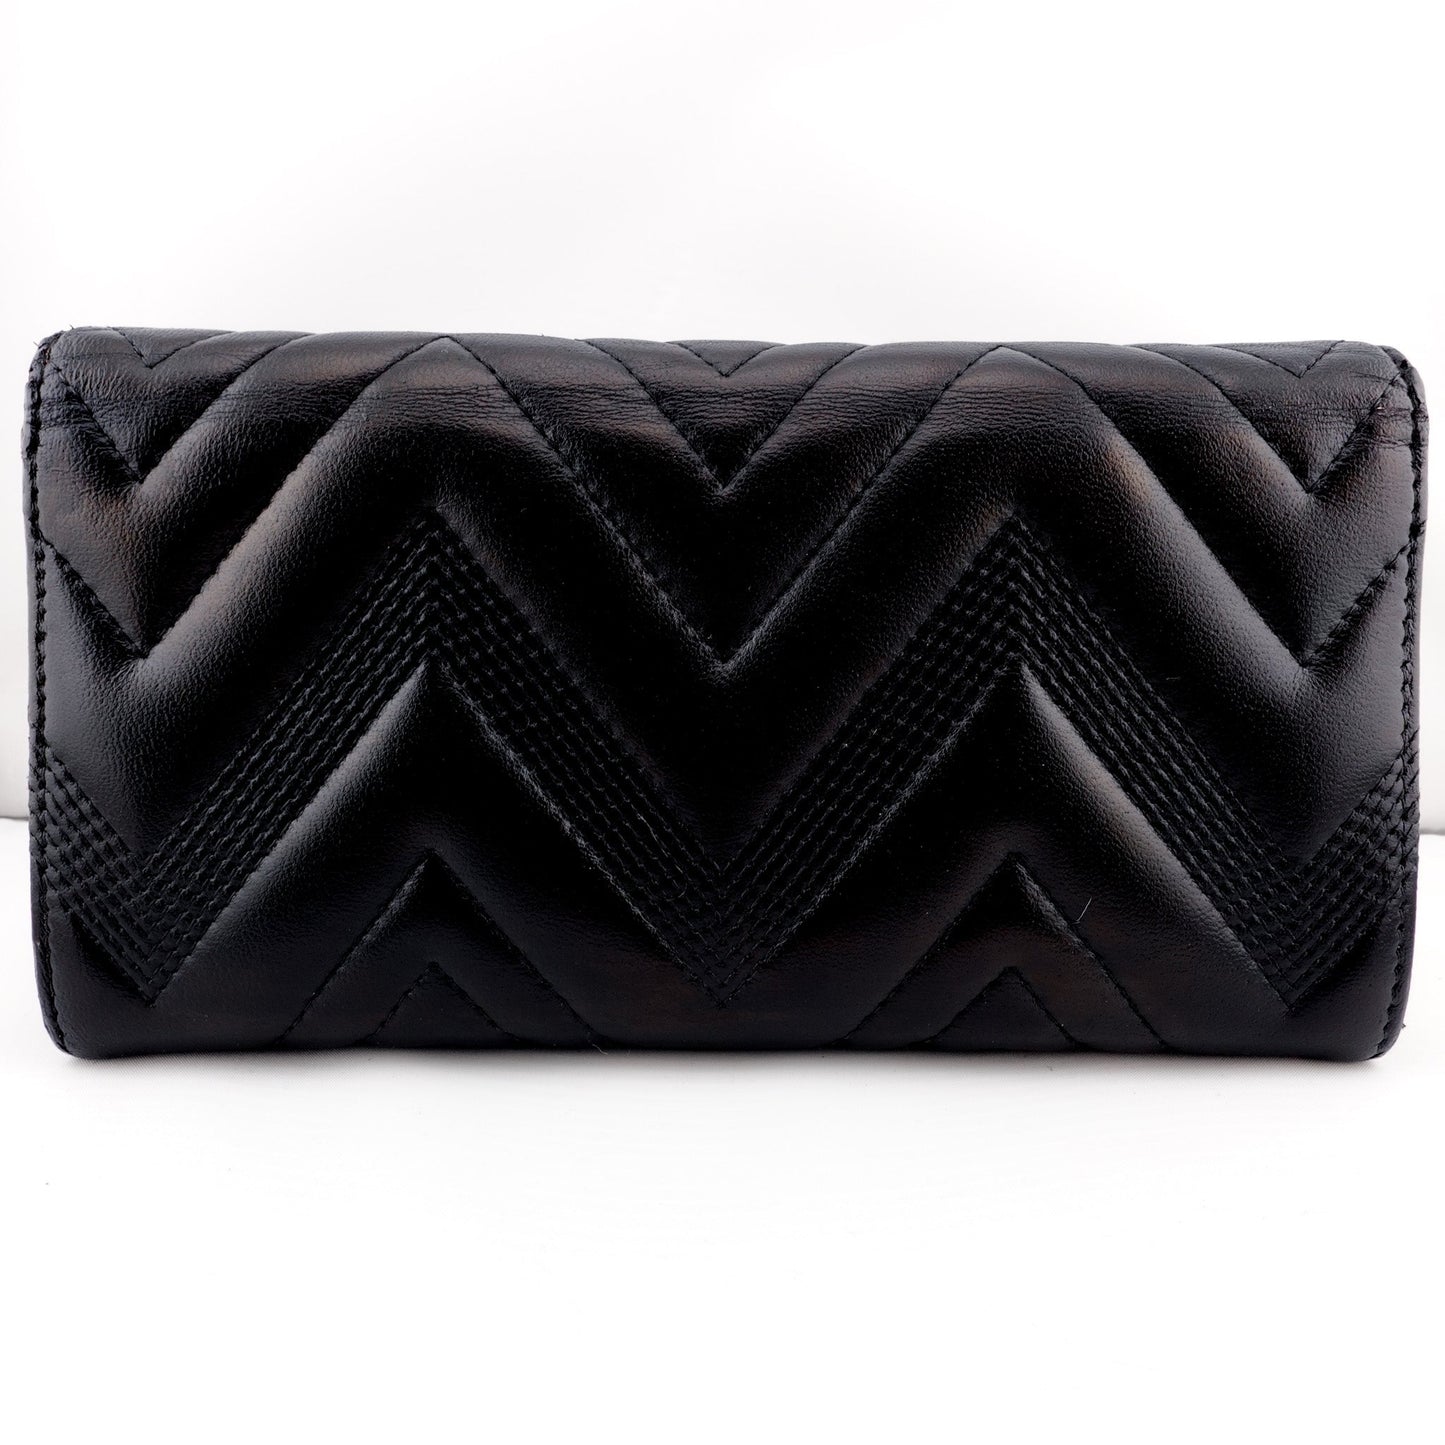 CHANEL Lambskin Chevron Quilted Full Flap Wallet with Adjustable Chain - Bag Envy